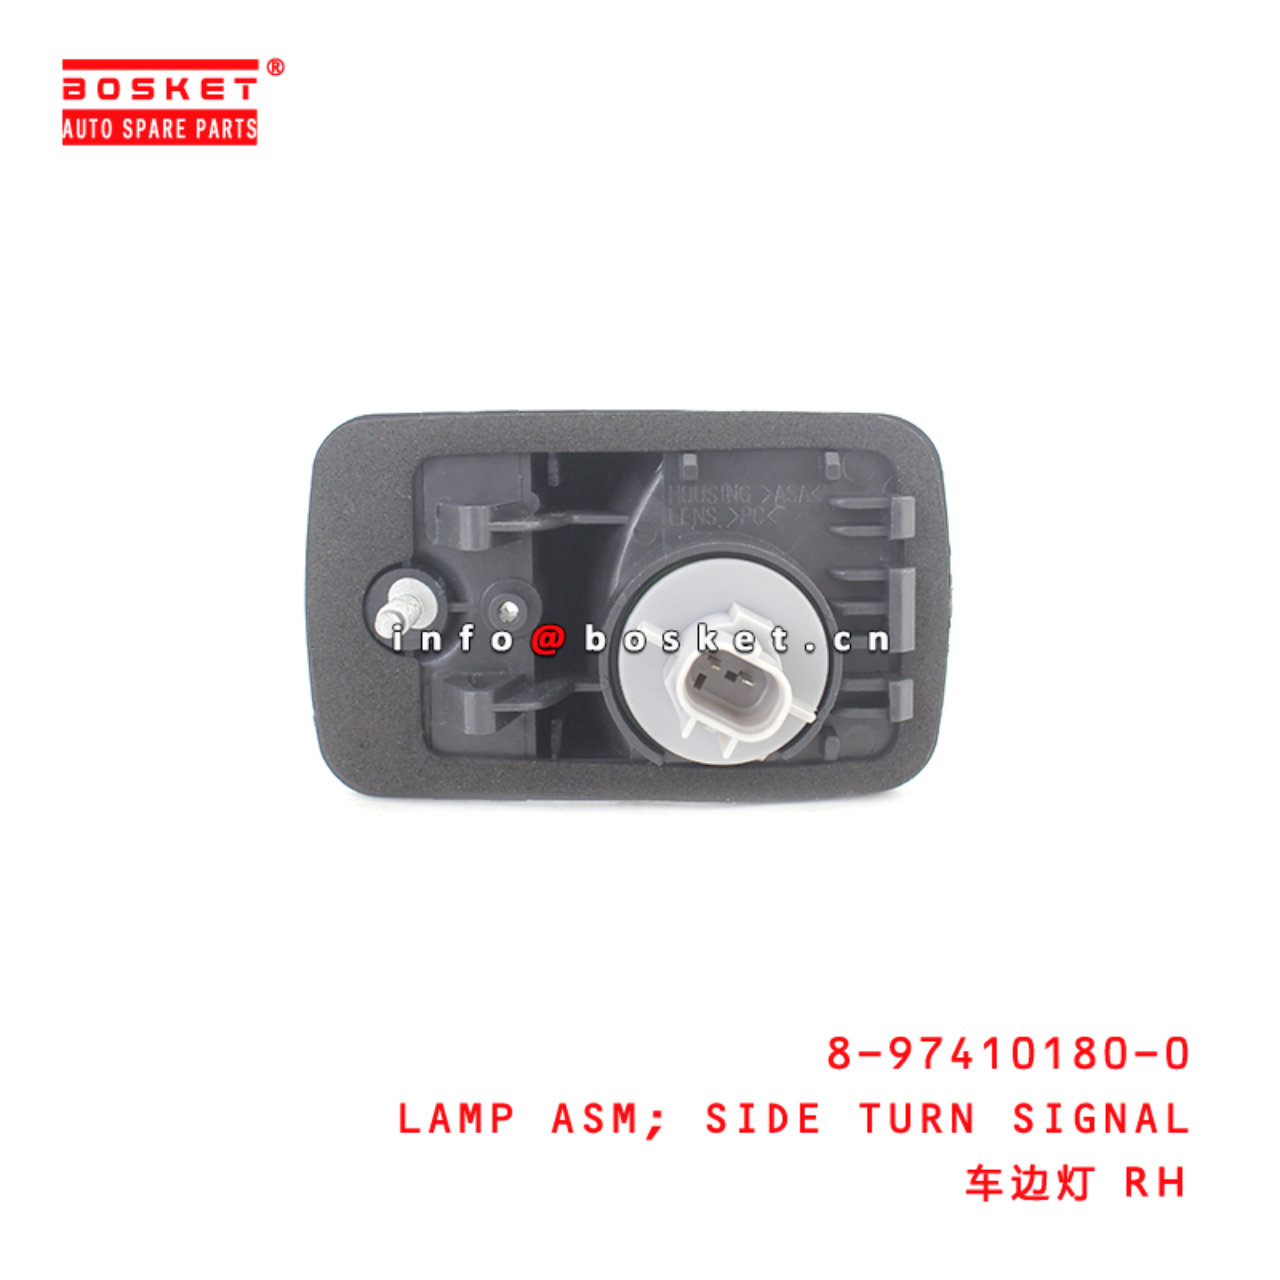 8-97410180-0 Side Turn Signal Lamp Assembly suitable for ISUZU 700P 8974101800